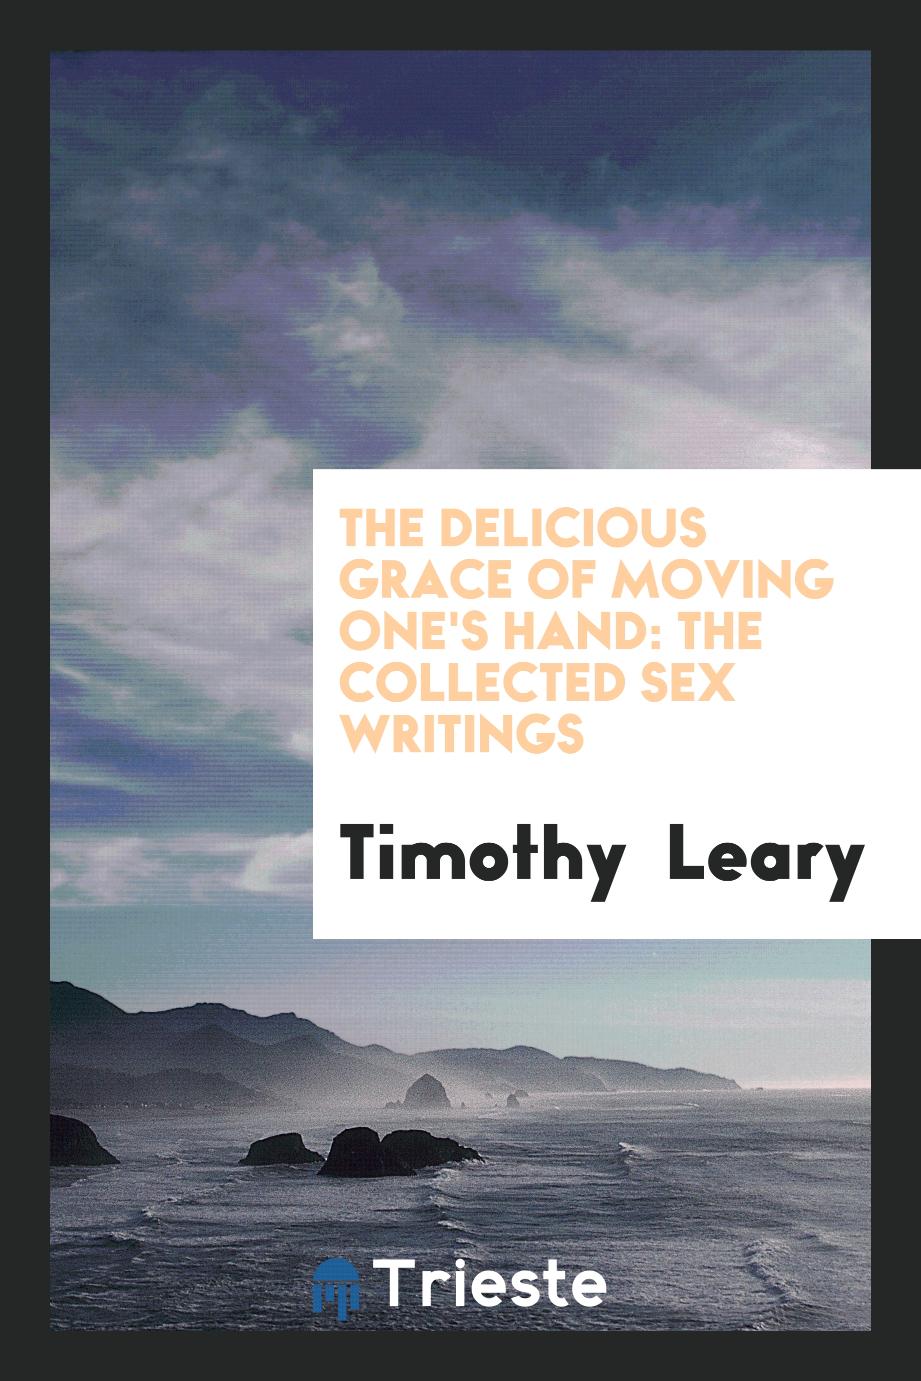 The Delicious Grace of Moving One's Hand: The Collected Sex Writings